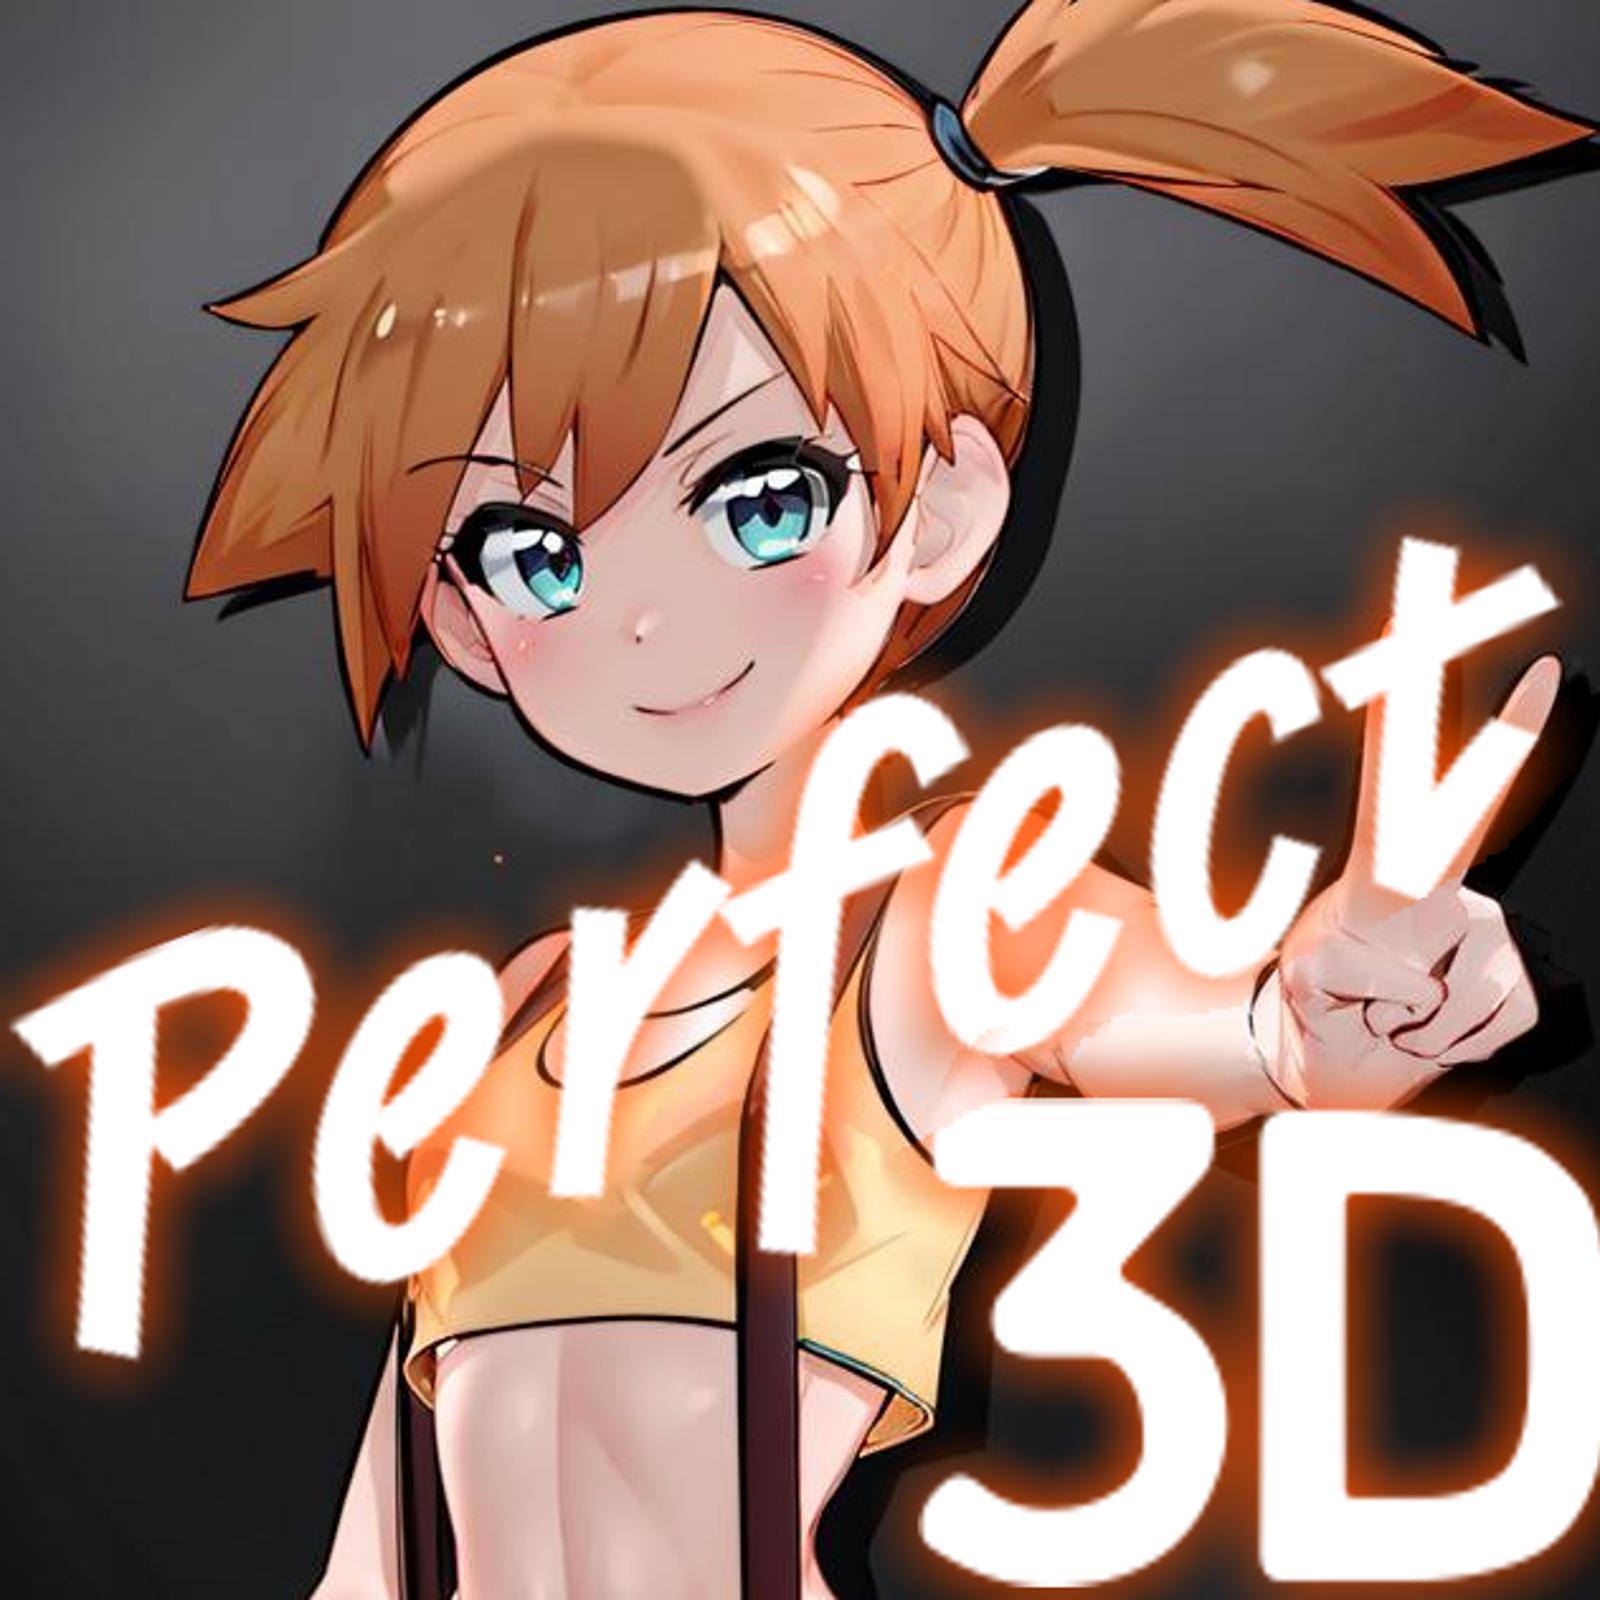 3D Style Projects